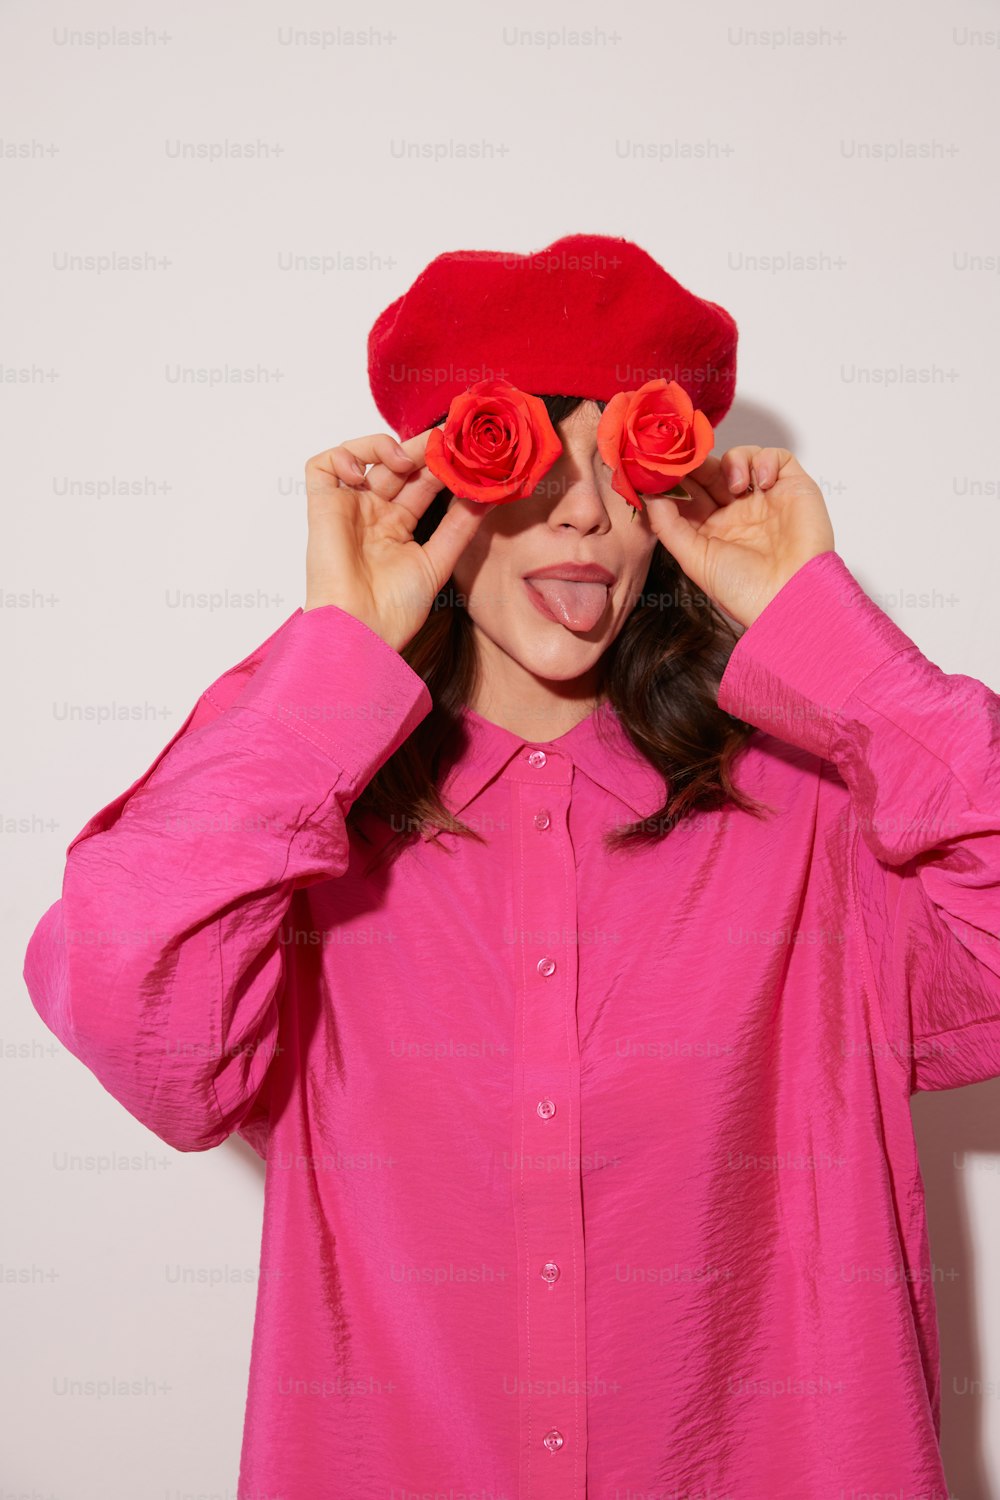 a woman wearing a pink shirt and a red rose hat